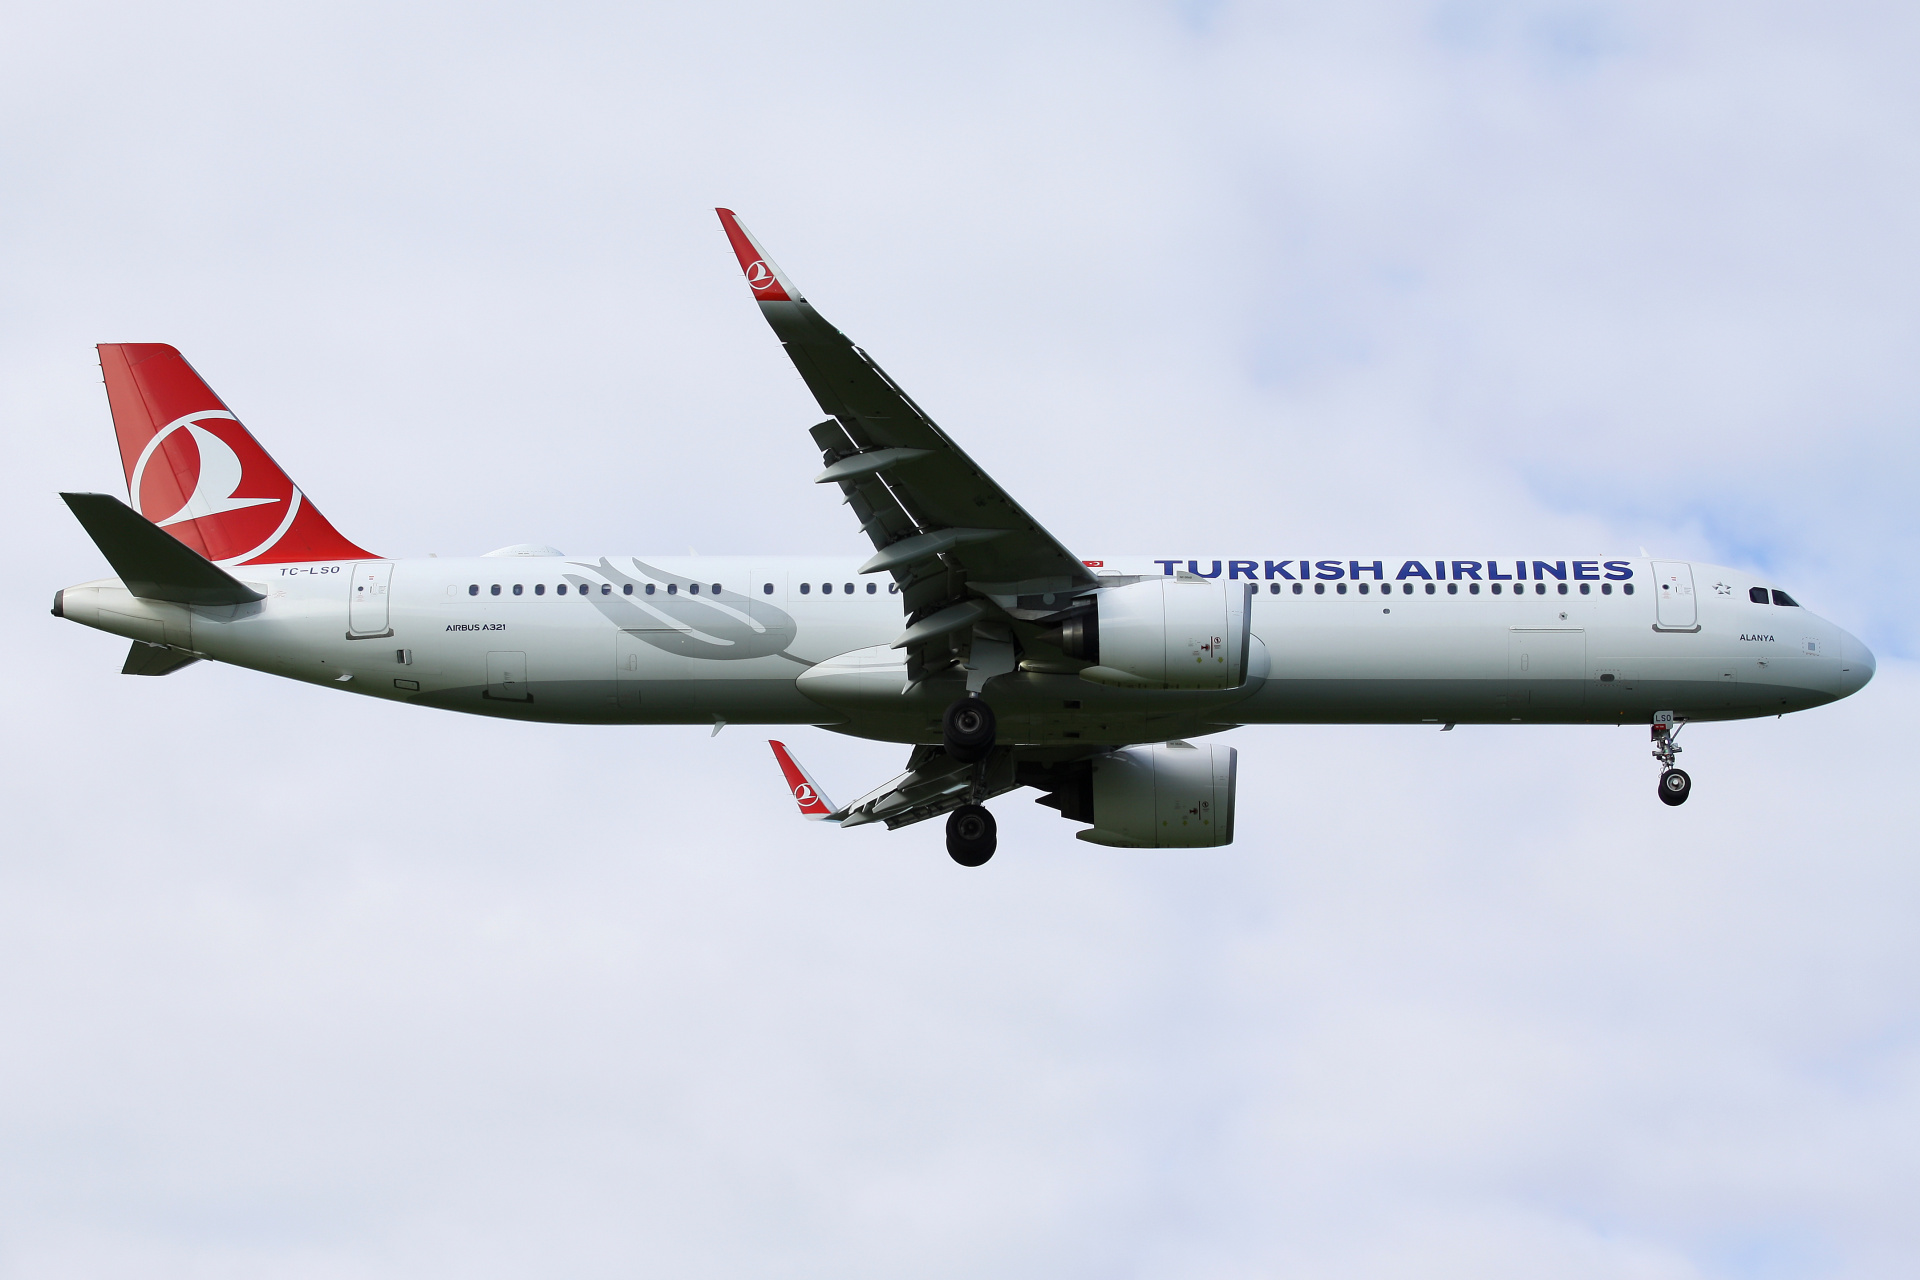 TC-LSO (Aircraft » EPWA Spotting » Airbus A321neo » THY Turkish Airlines)